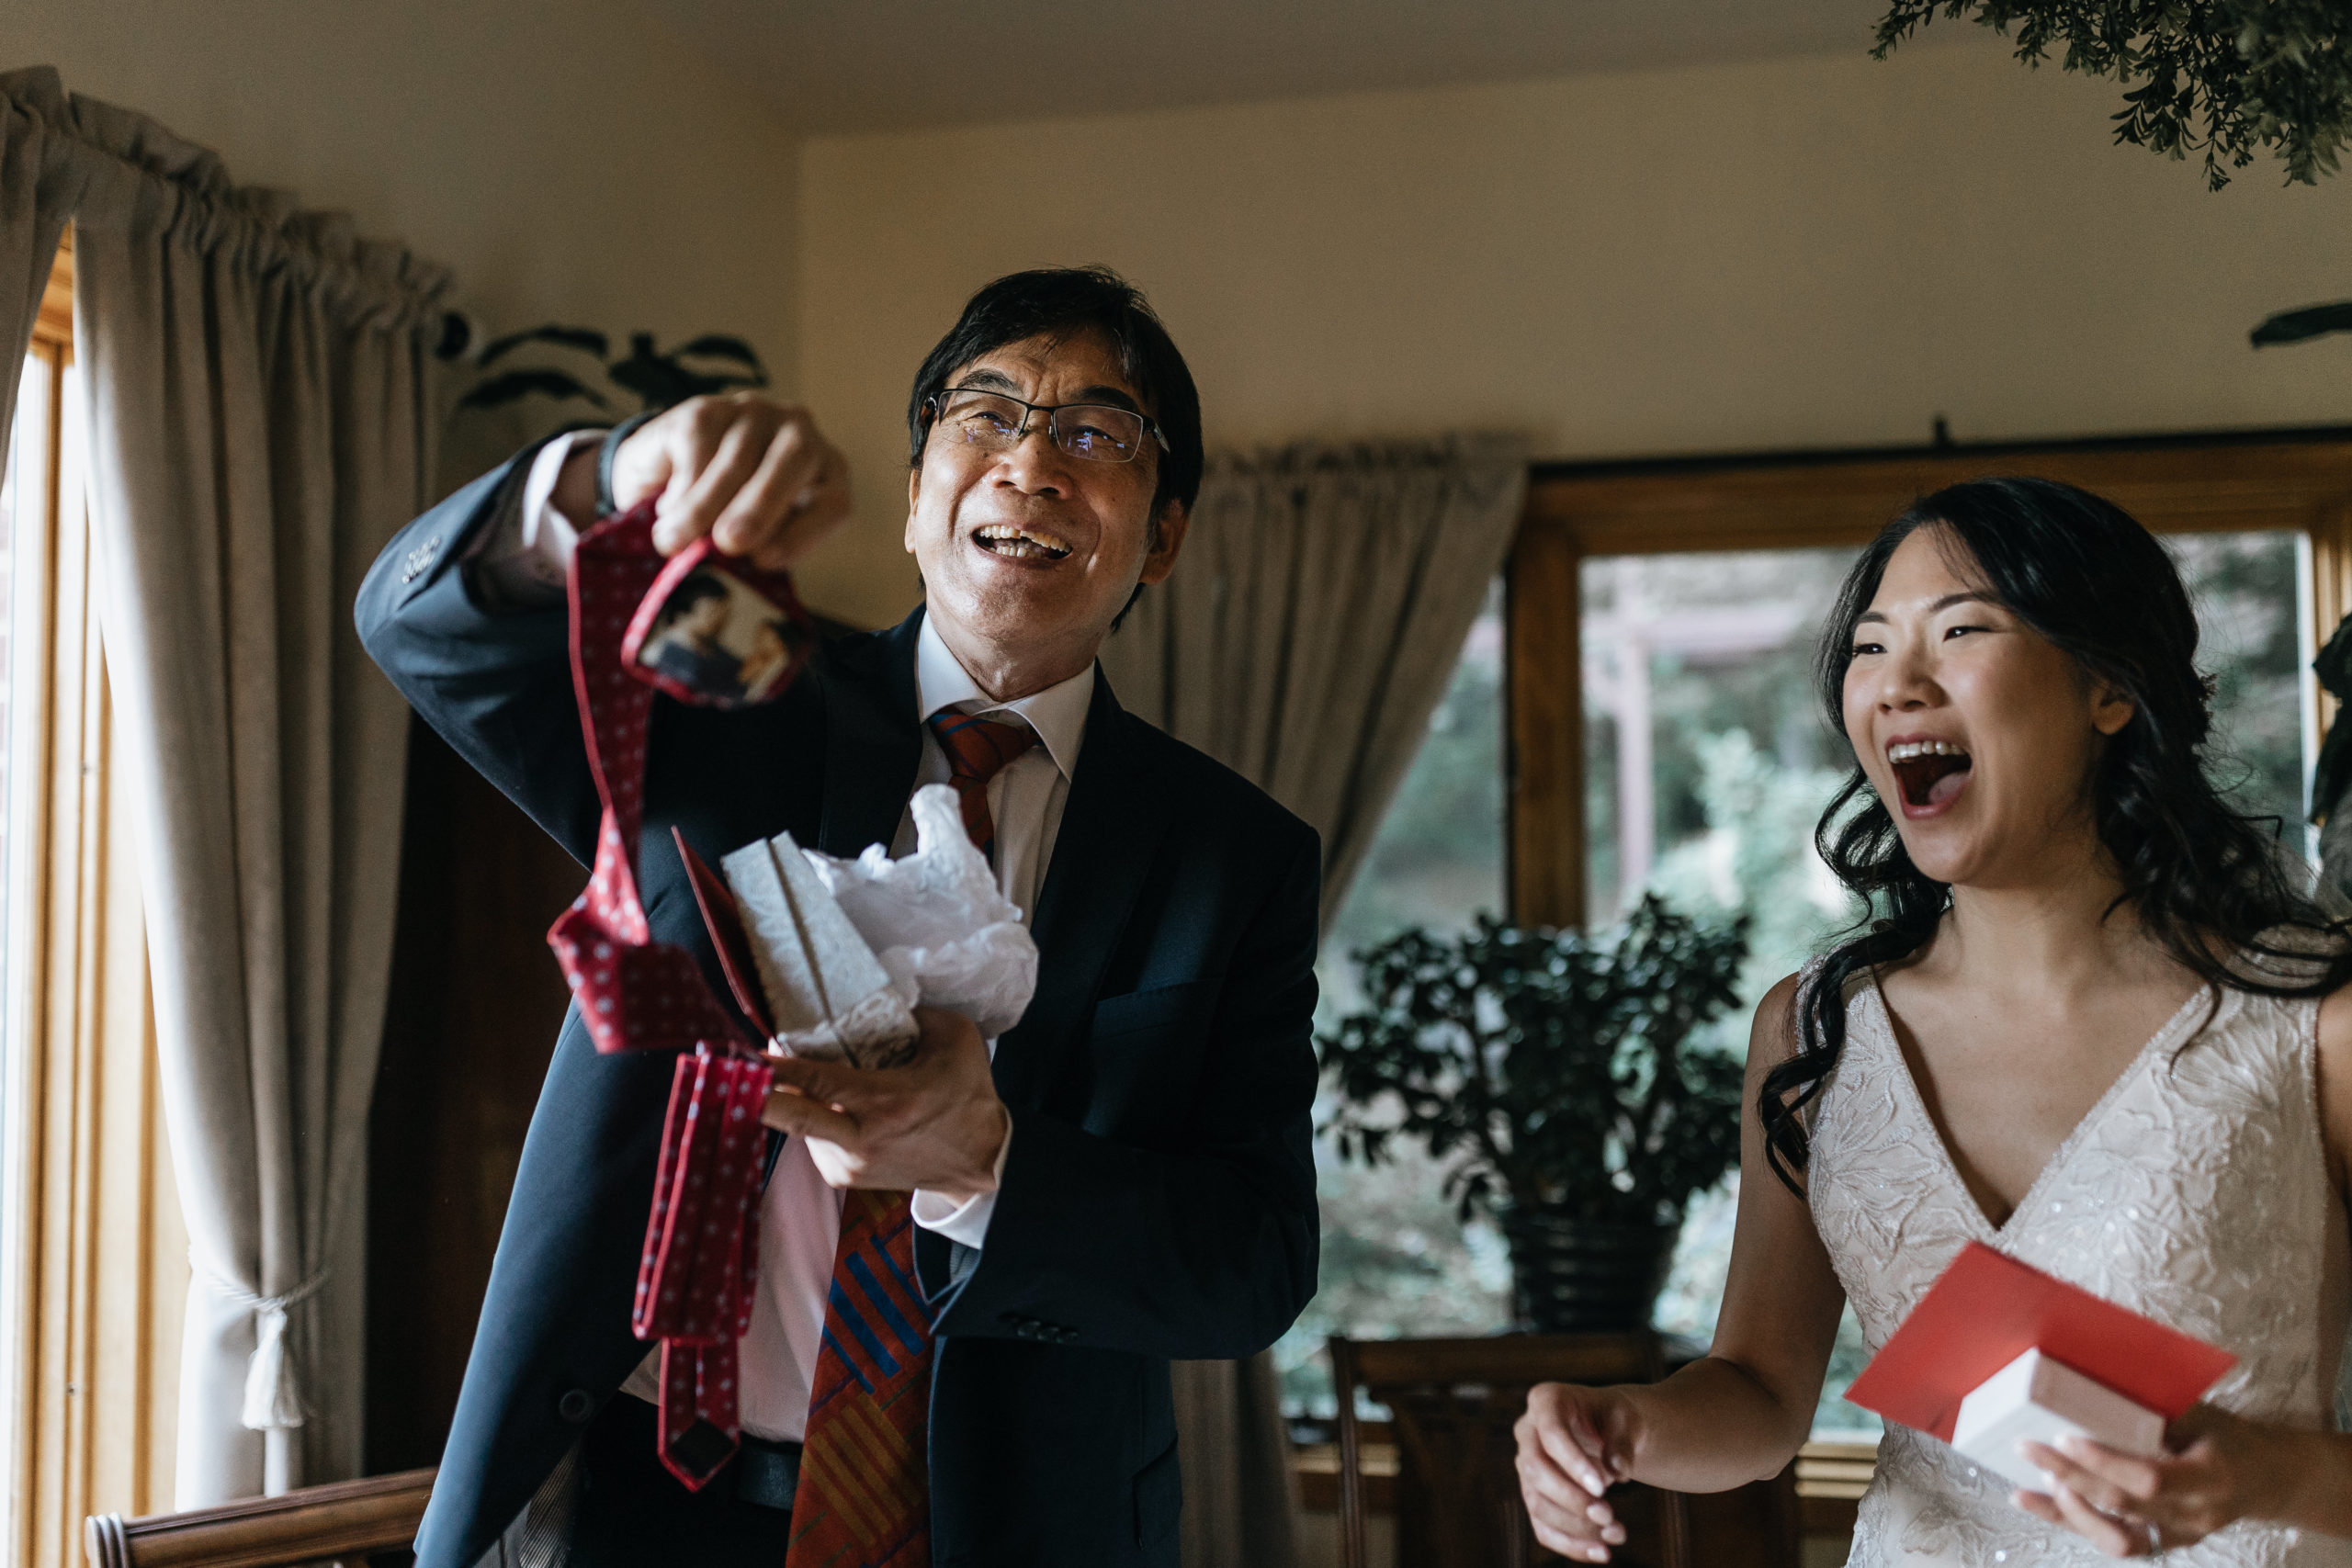 dad opens gift from his daughter on her wedding day and is overjoyed